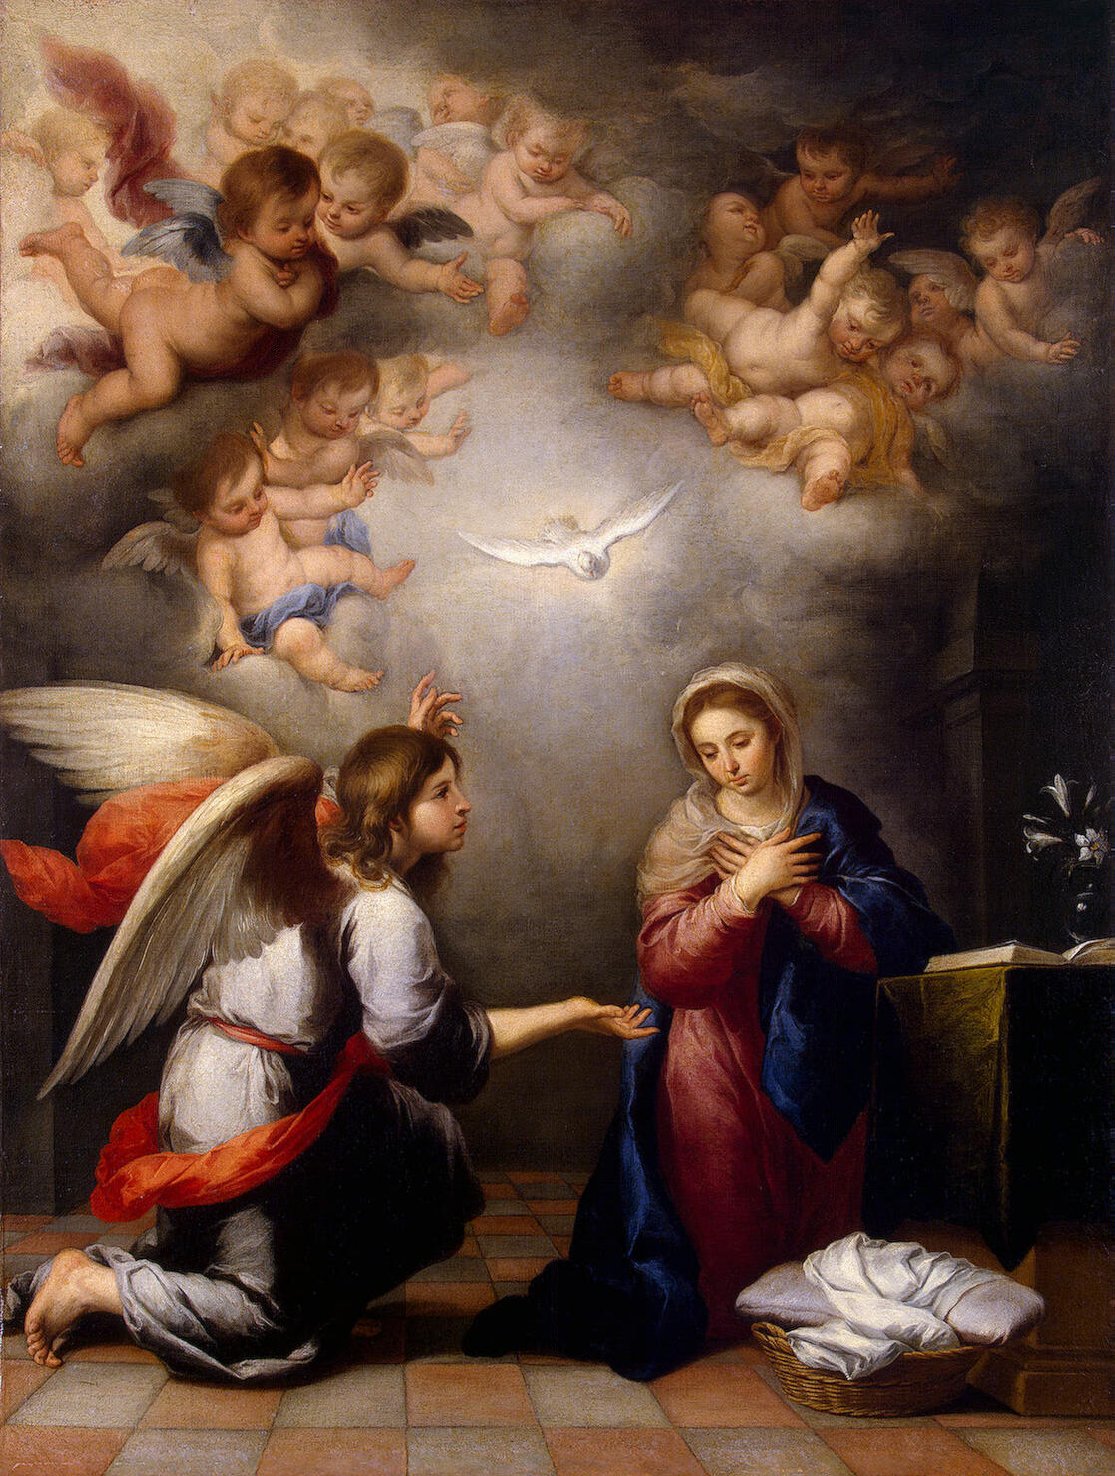 Angel Gabriel's Annunciation to Mary, by Murillo, c. 1655